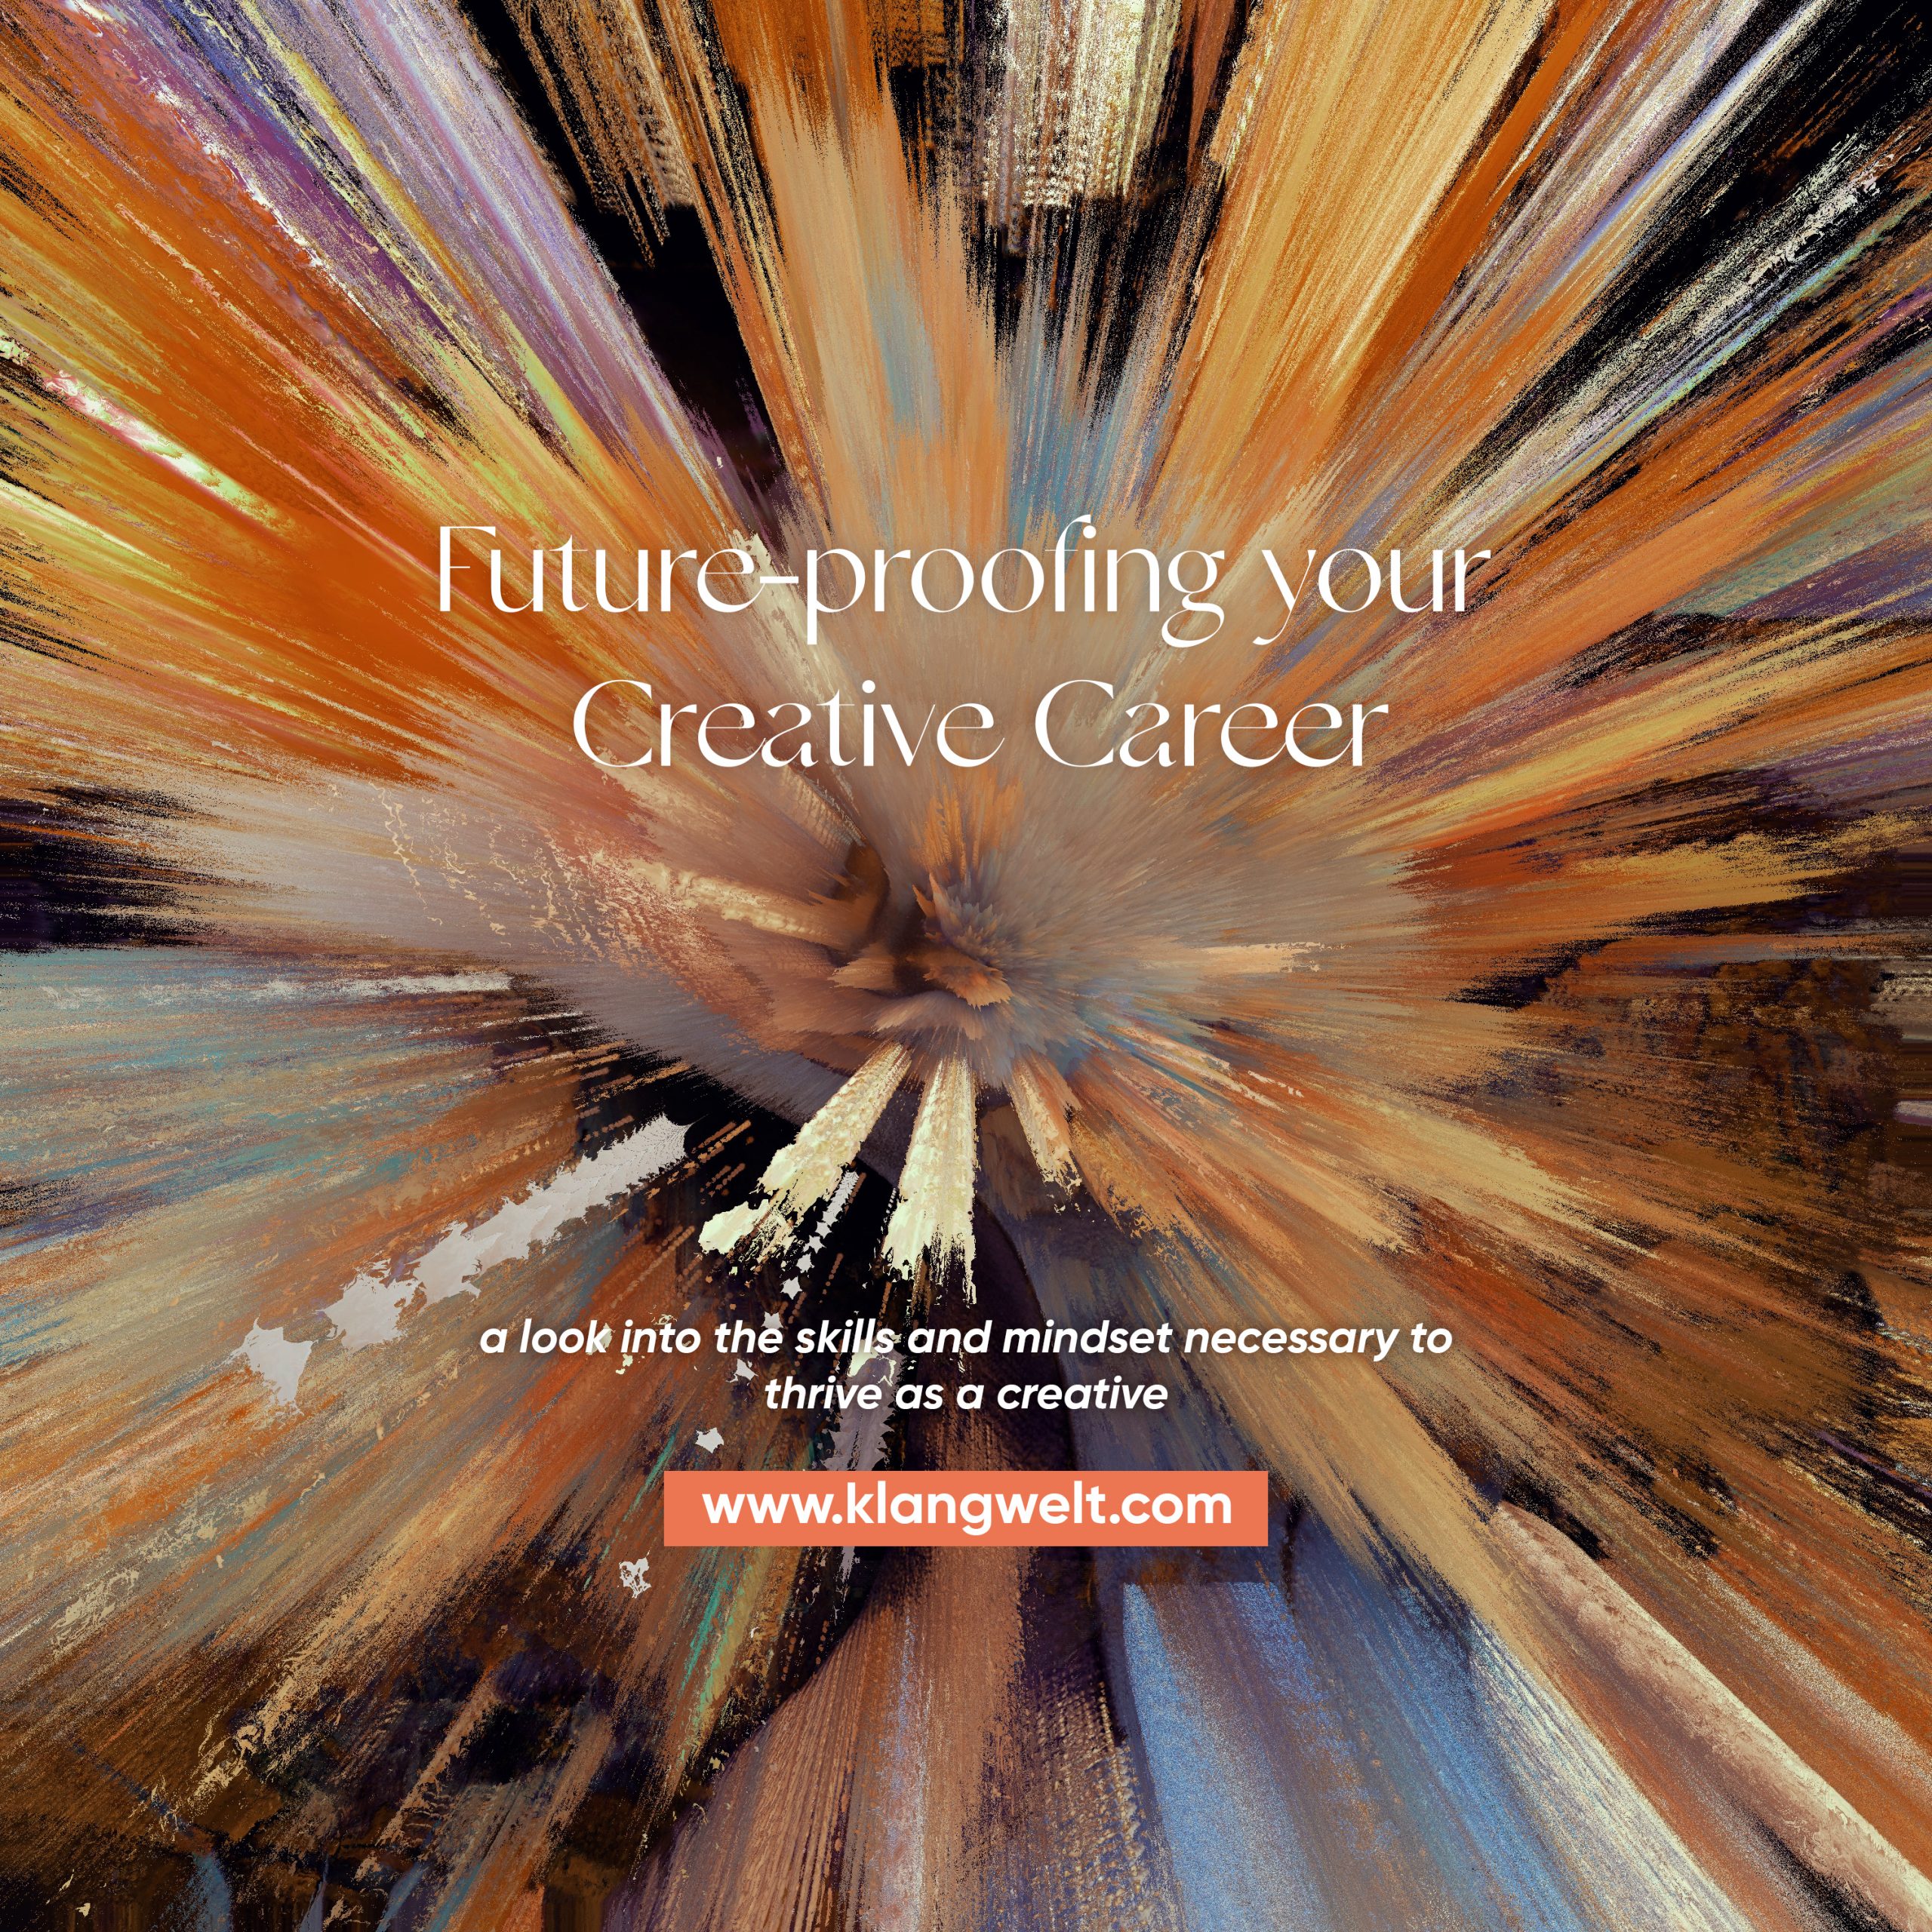 Future proofing your Creative Career